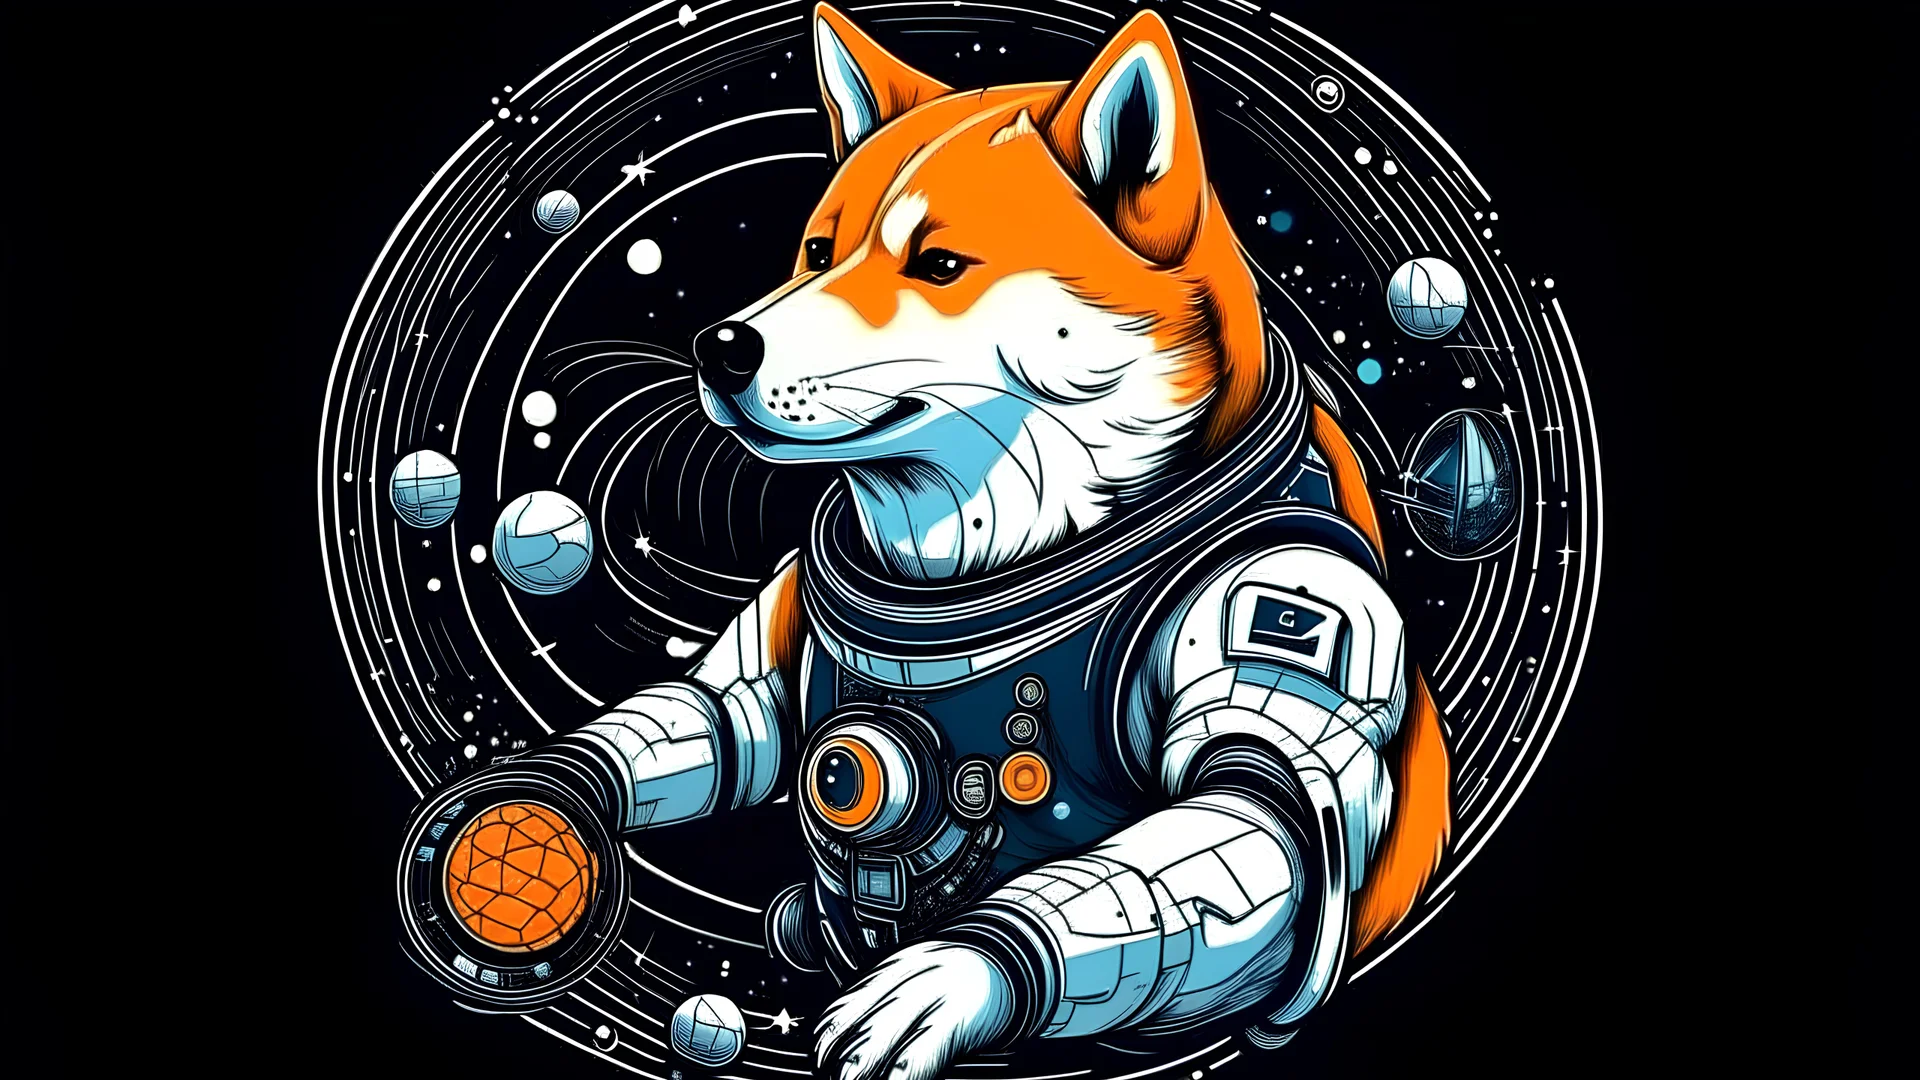 draw a Shiba inu dog with cybernetic modifications in a spacesuit as it flies through space with the logos of the biggest cryptocurrencies instead of planets